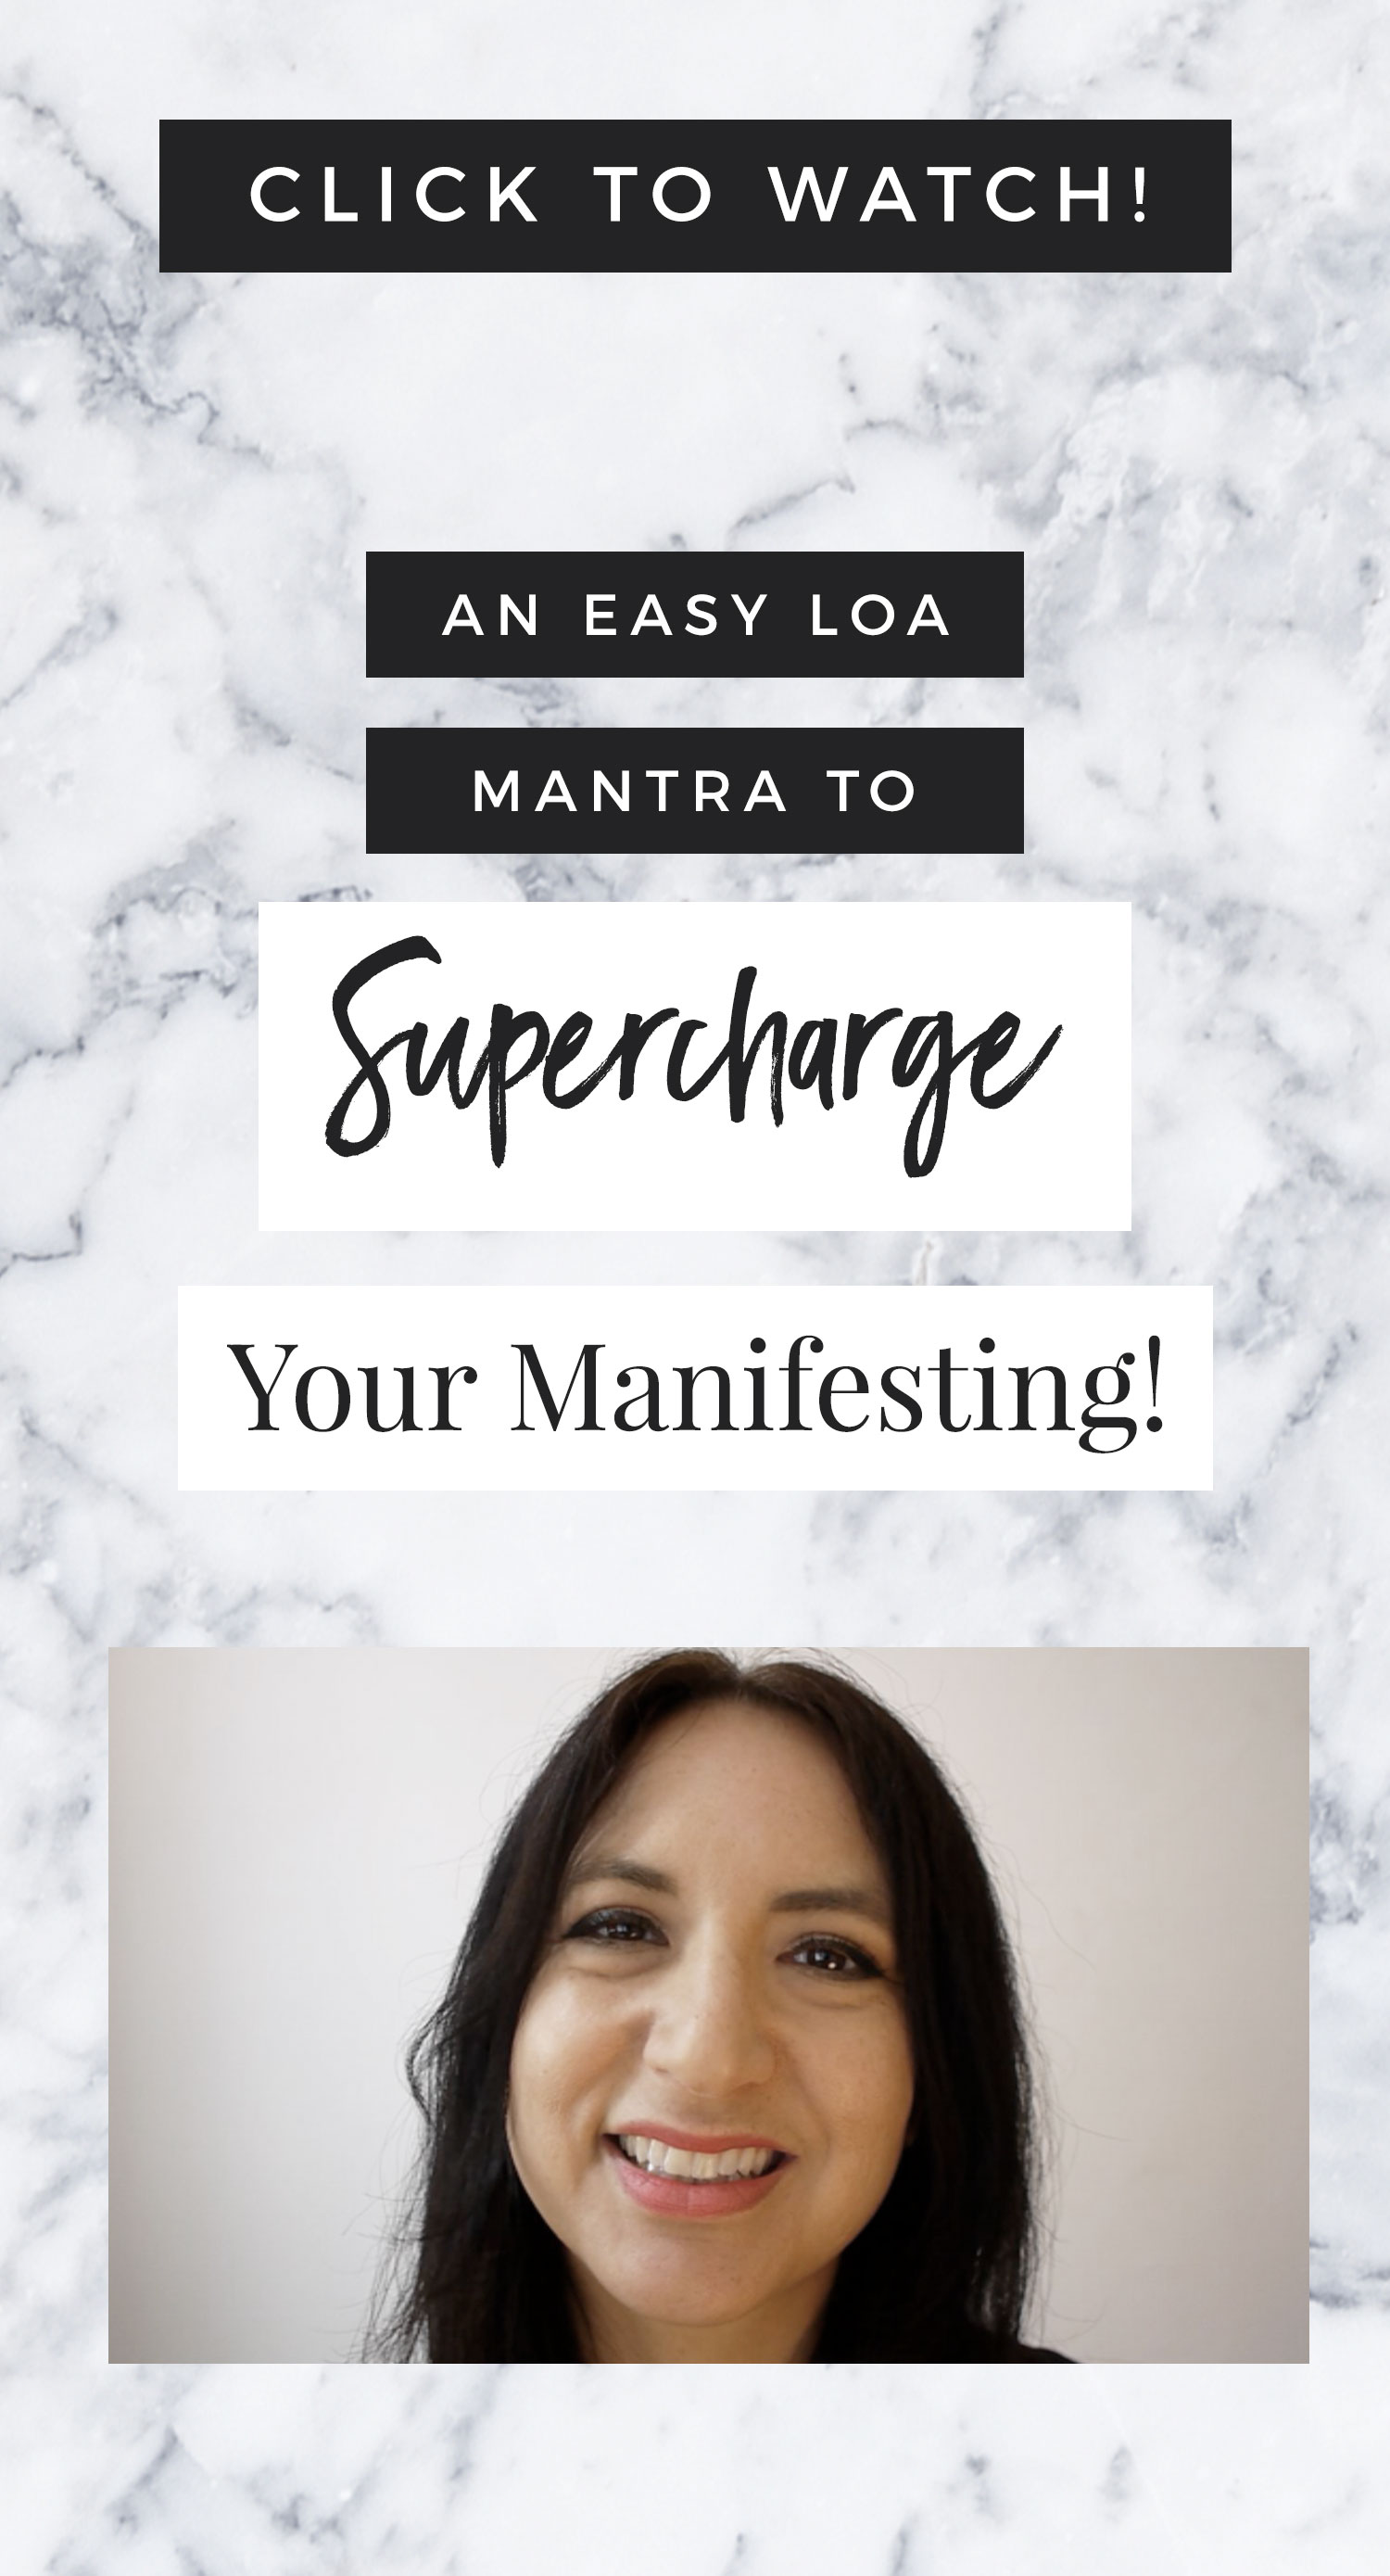 An Easy LoA Mantra To Supercharge Your Manifesting